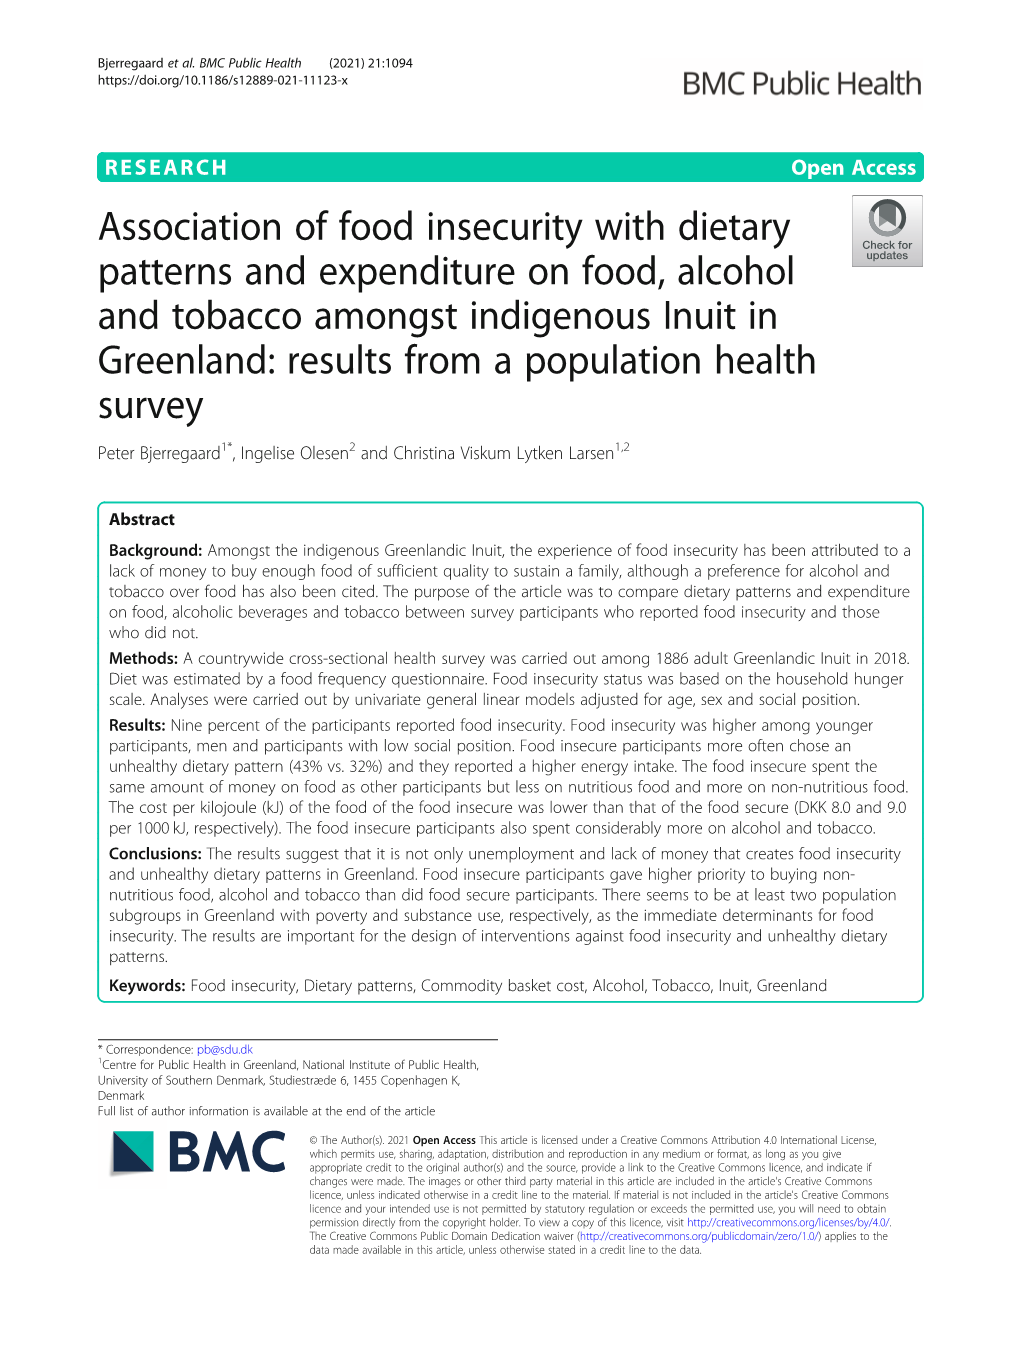 Association of Food Insecurity with Dietary Patterns and Expenditure on Food, Alcohol and Tobacco Amongst Indigenous Inuit in Gr